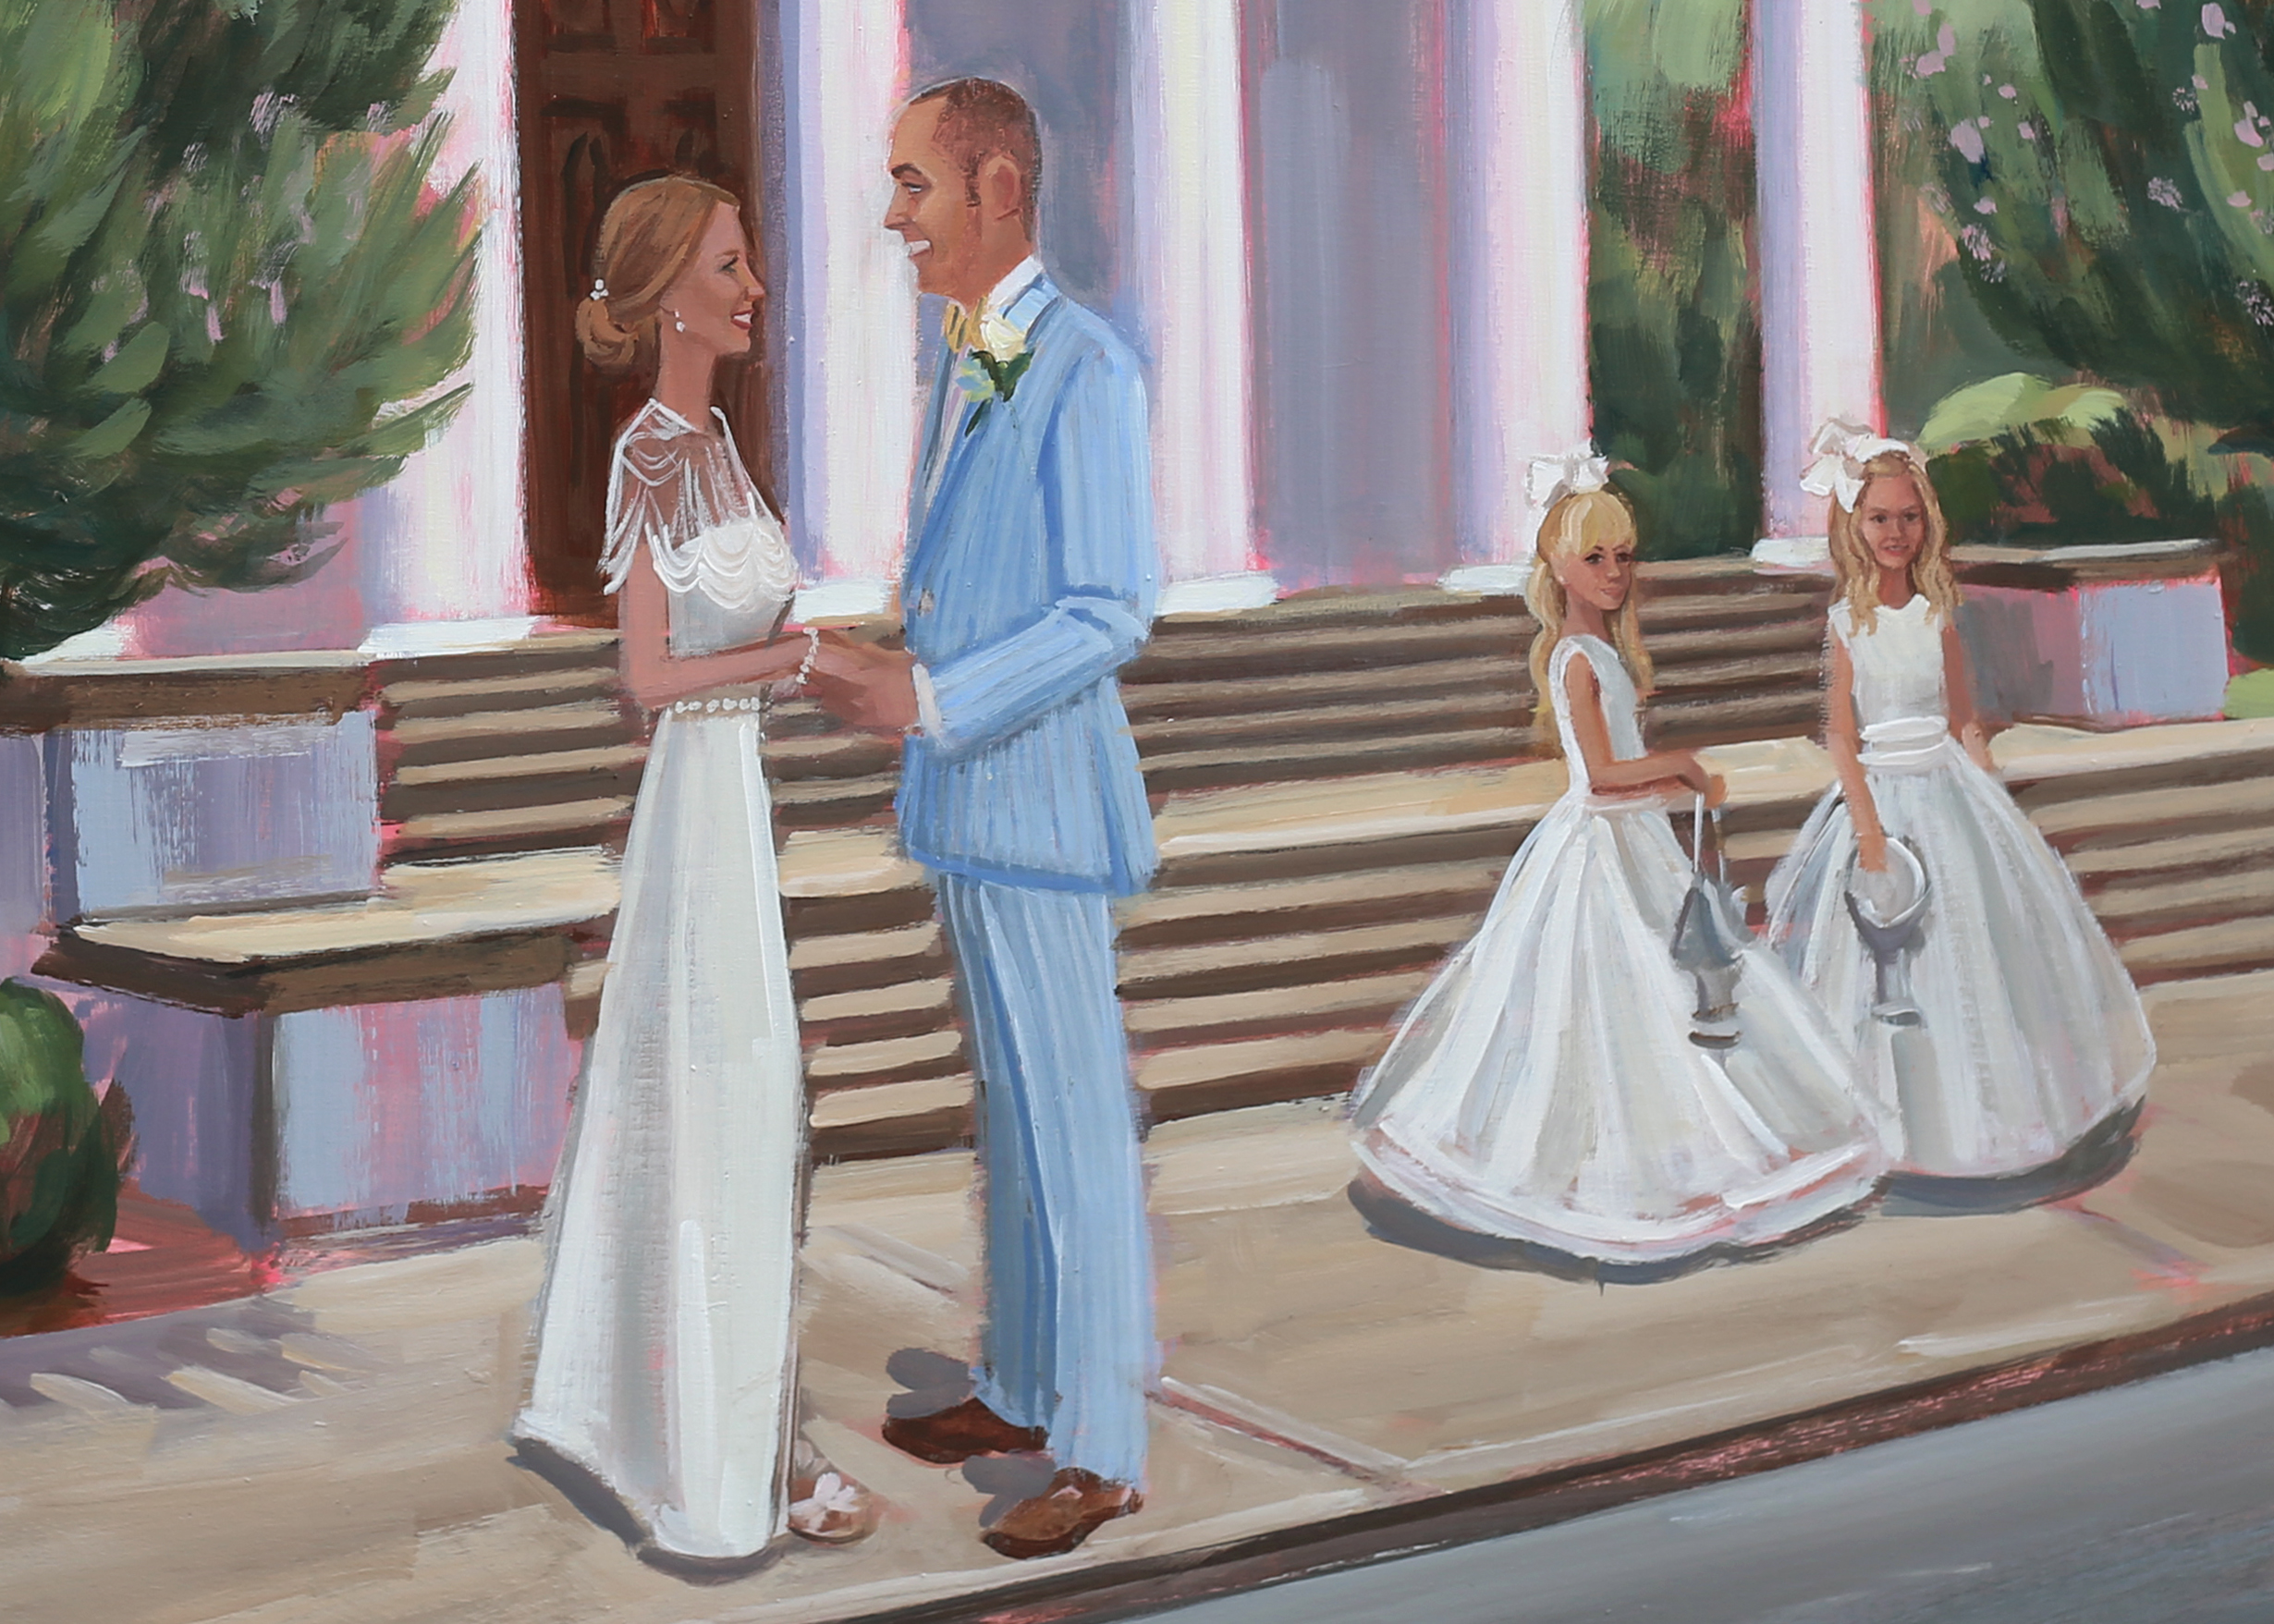 Anne + Jason captured on canvas live with their two daughter’s by Charleston’s live wedding painter, Ben Keys, of Wed on Canvas.